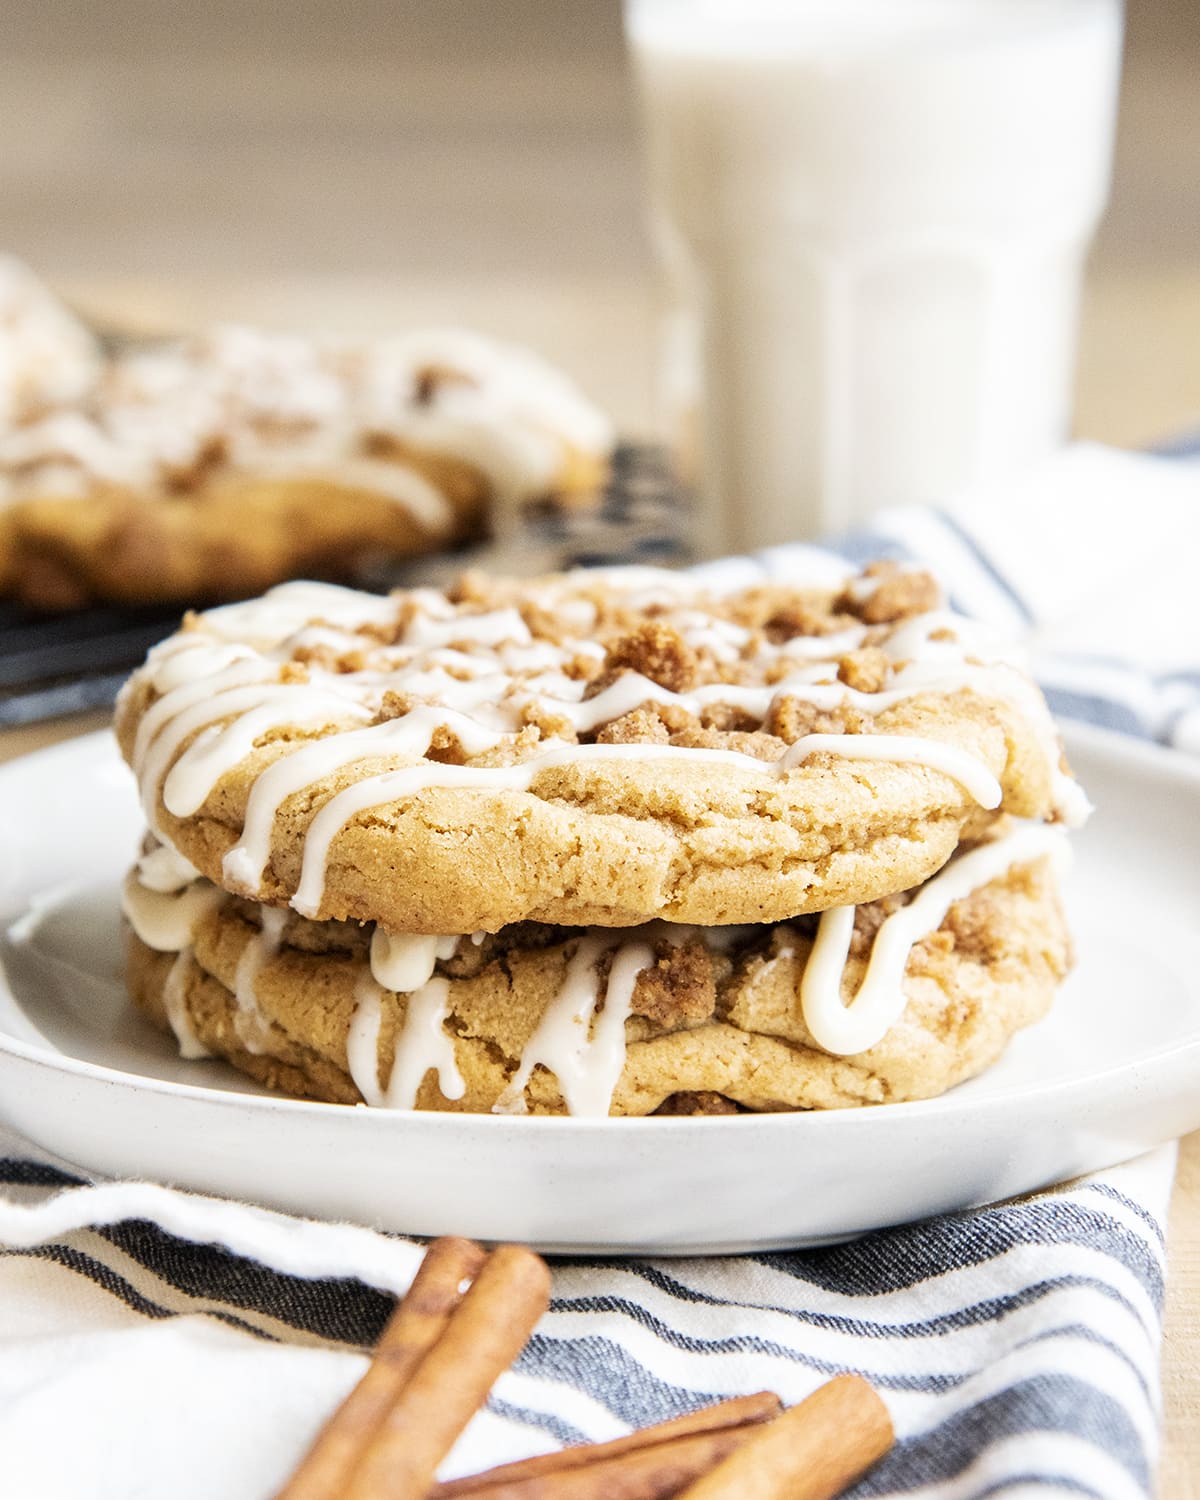 A stack of two coffee cake cookies on a plate, drizzled with icing on top.